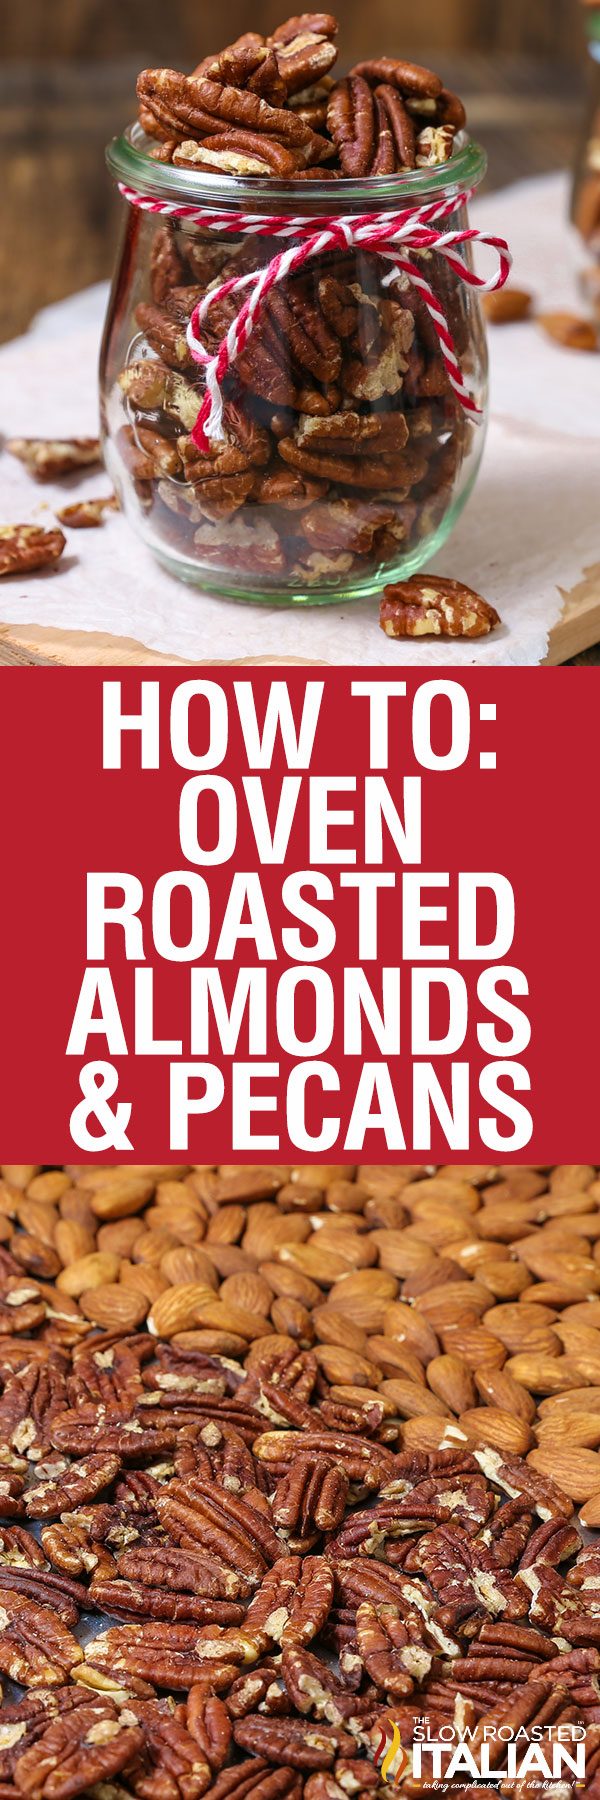 oven roasted almonds and pecans